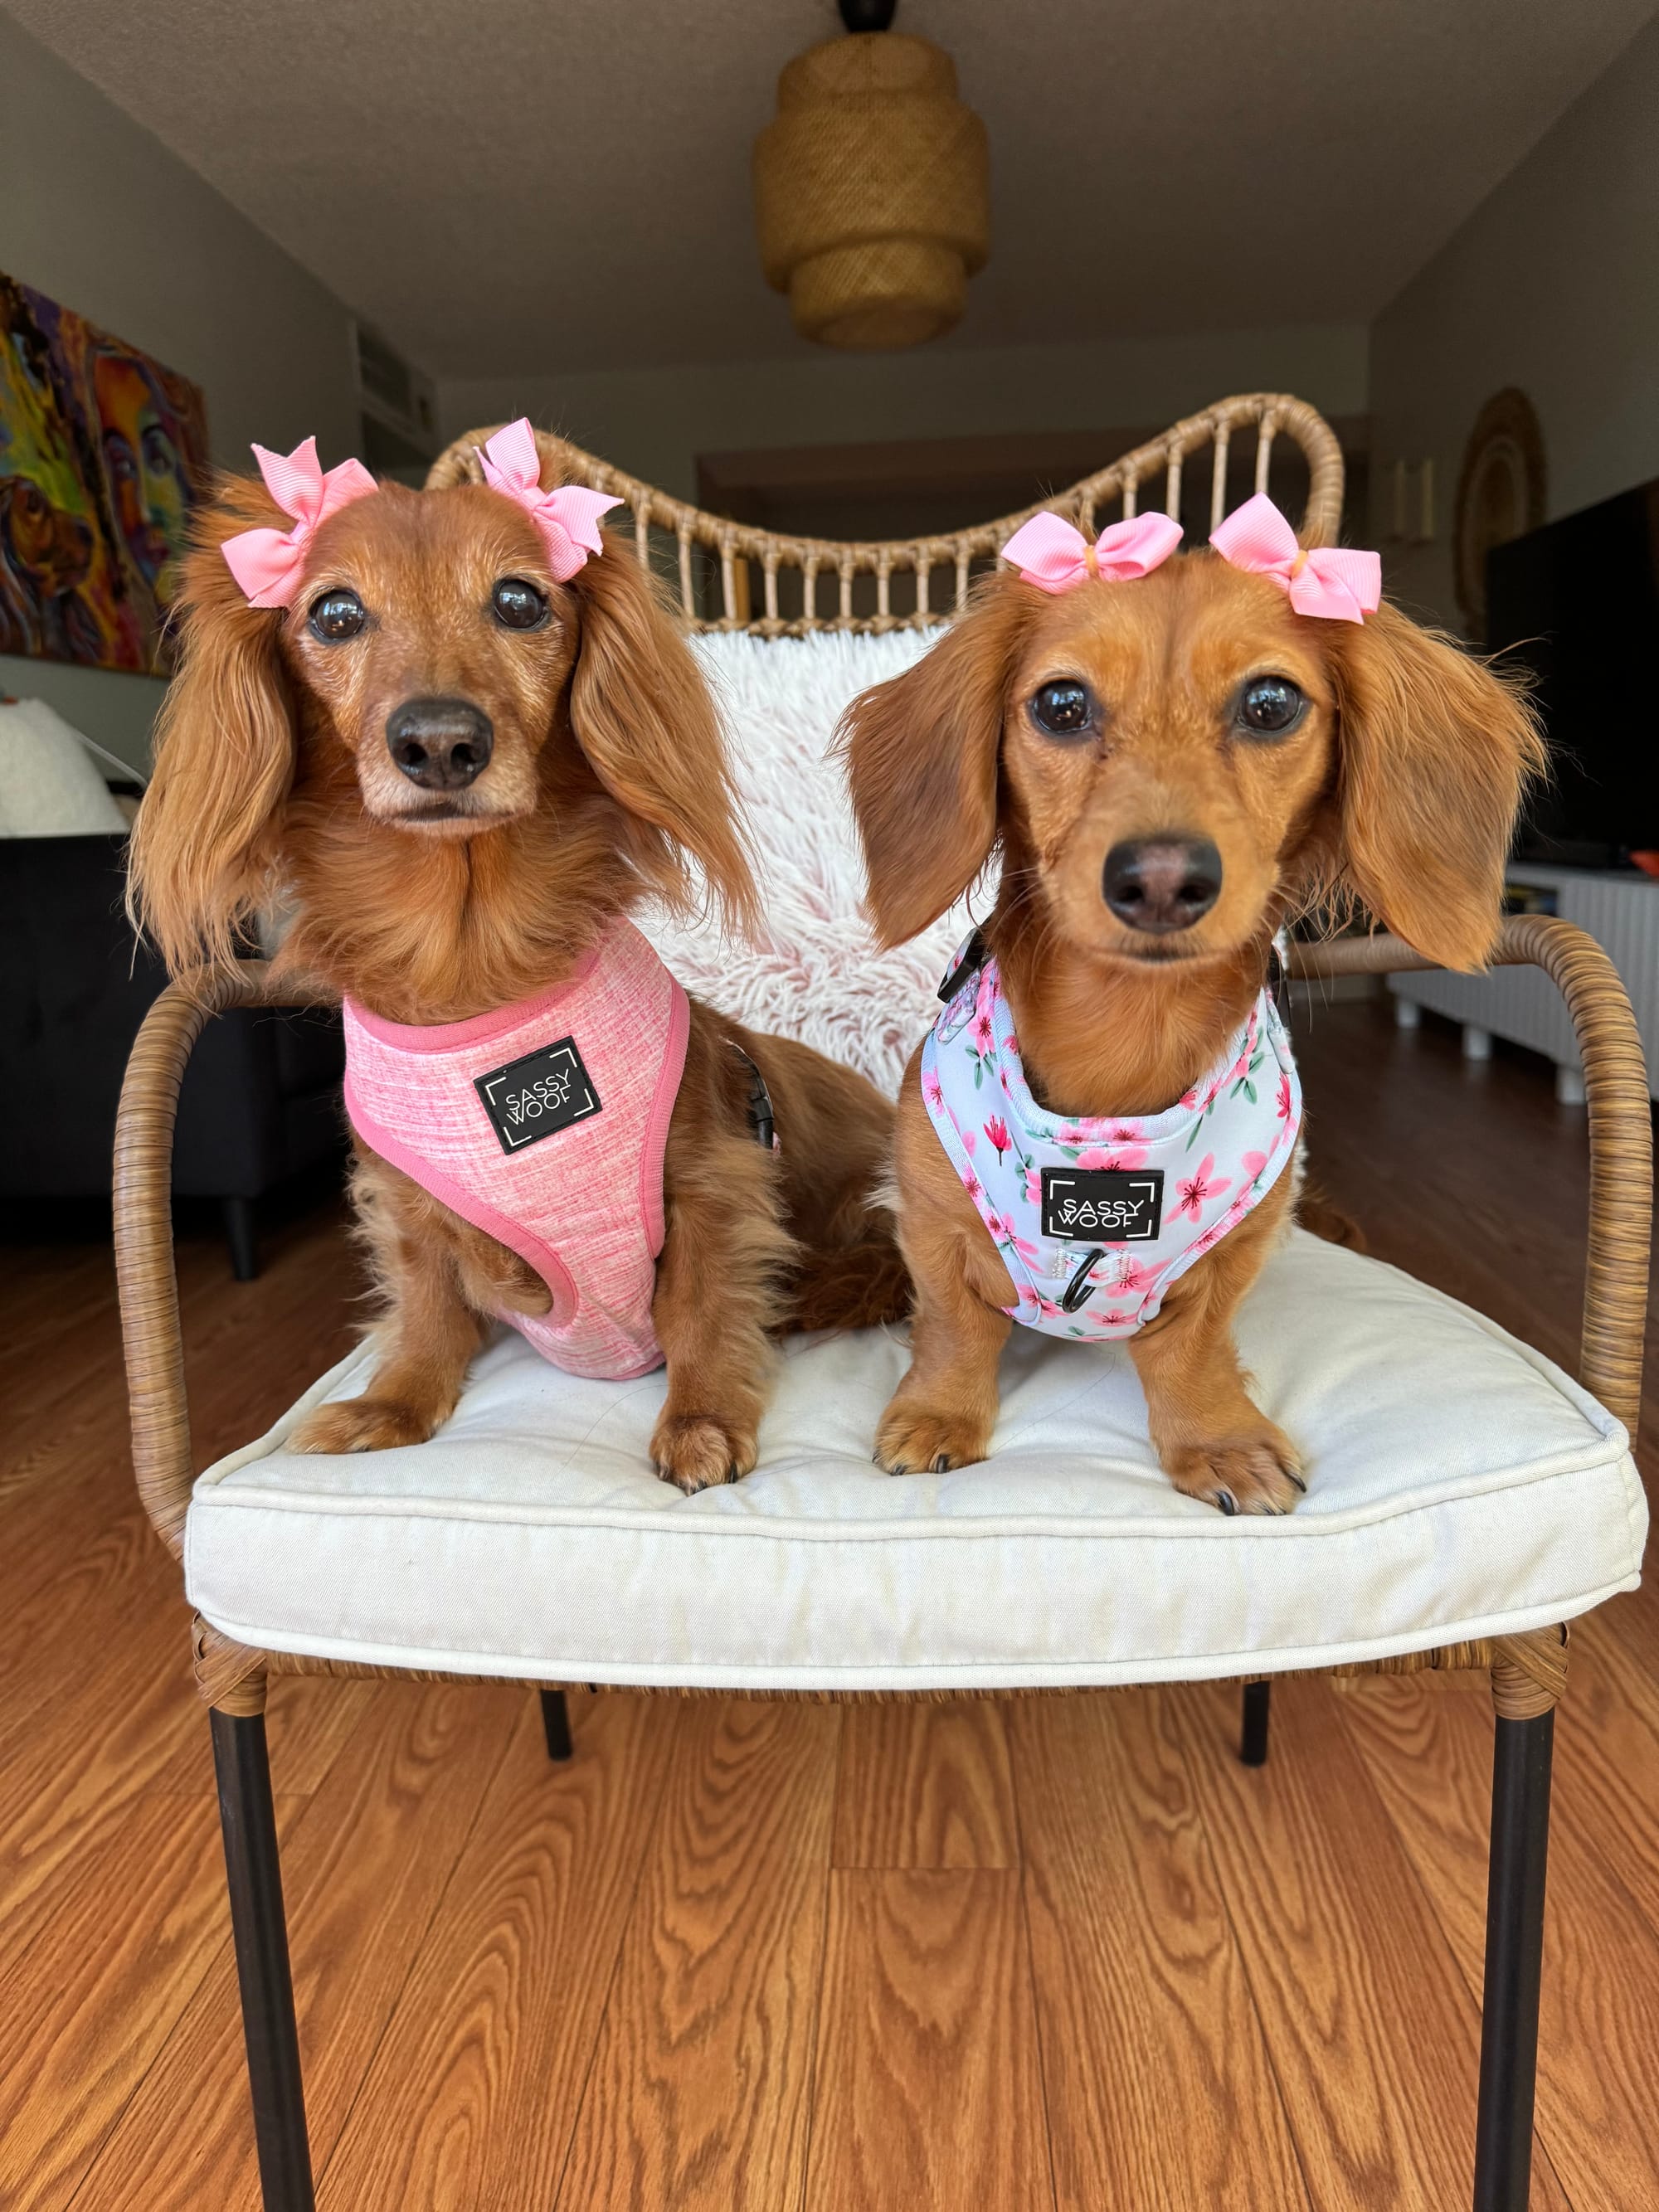 DOGFLUENCERS: Meet Vienna & Chai, The Queens of Weens